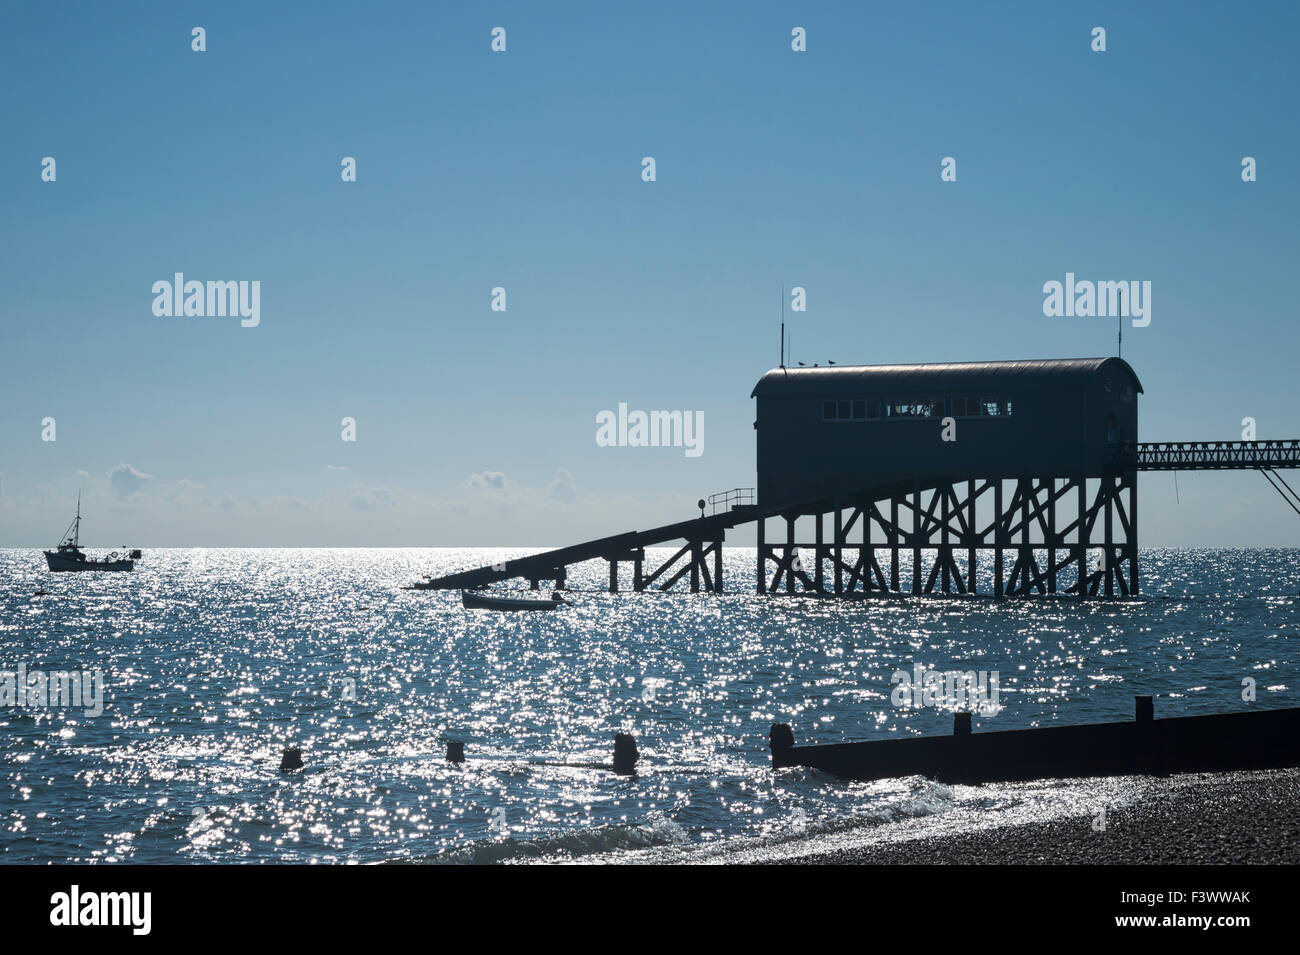 RNLI Lifeboat Station bei Selsey Bill, Sussex, UK Stockfoto